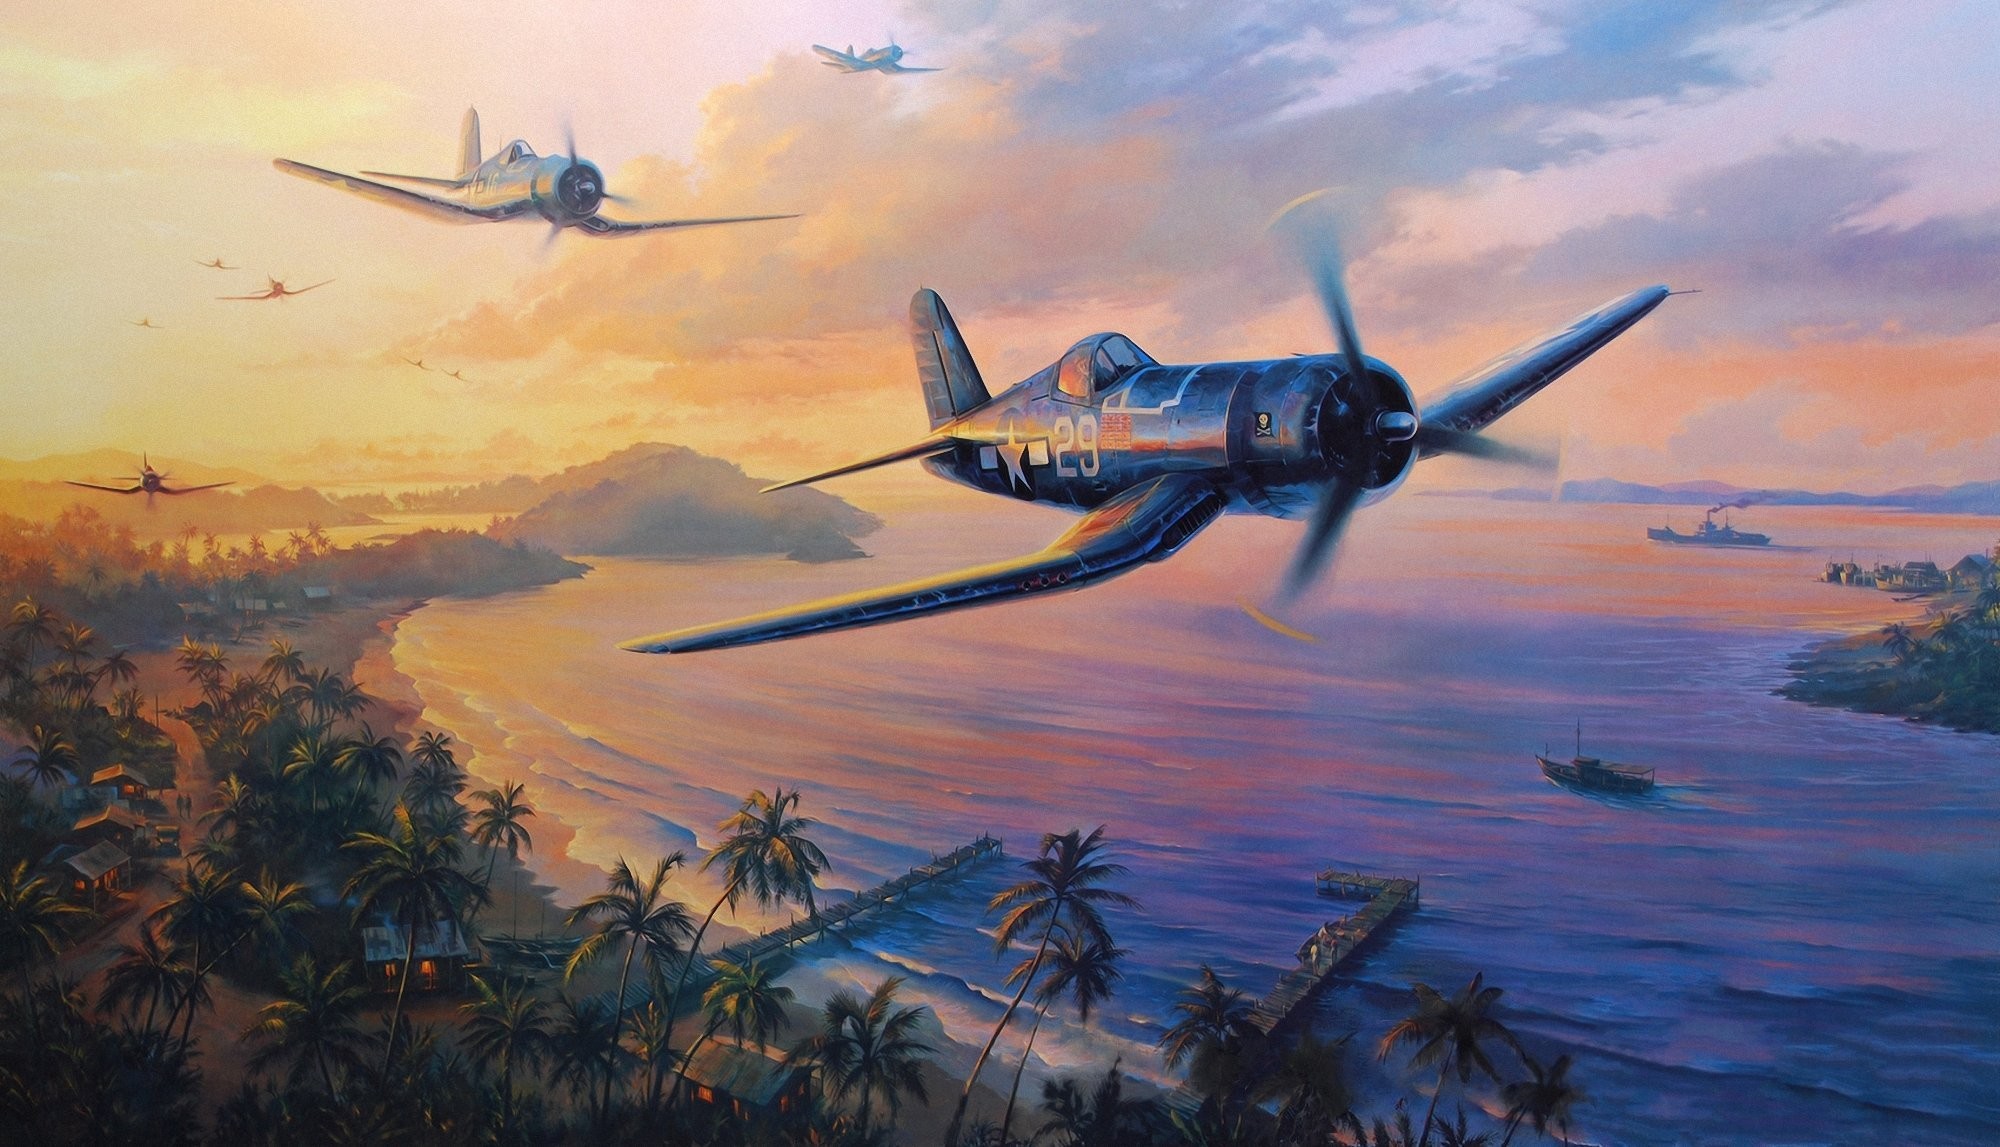 2000x1147 Wallpaper(s) found for: "aviation" for Android, iPhone and desktop